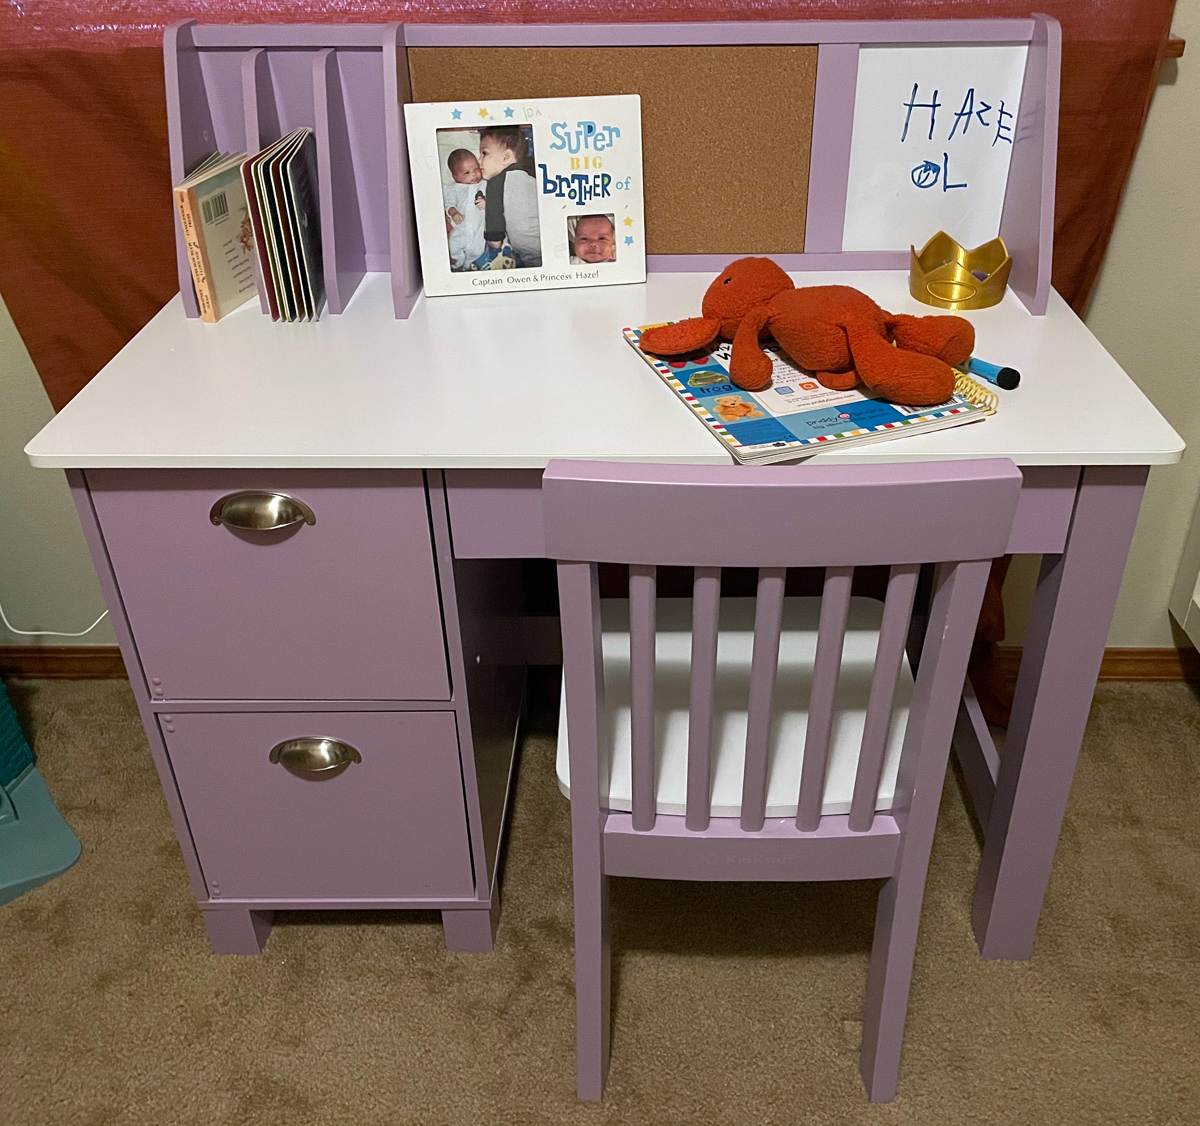 A table top design refresh adds new life to a kid desk in just 10 minutes!